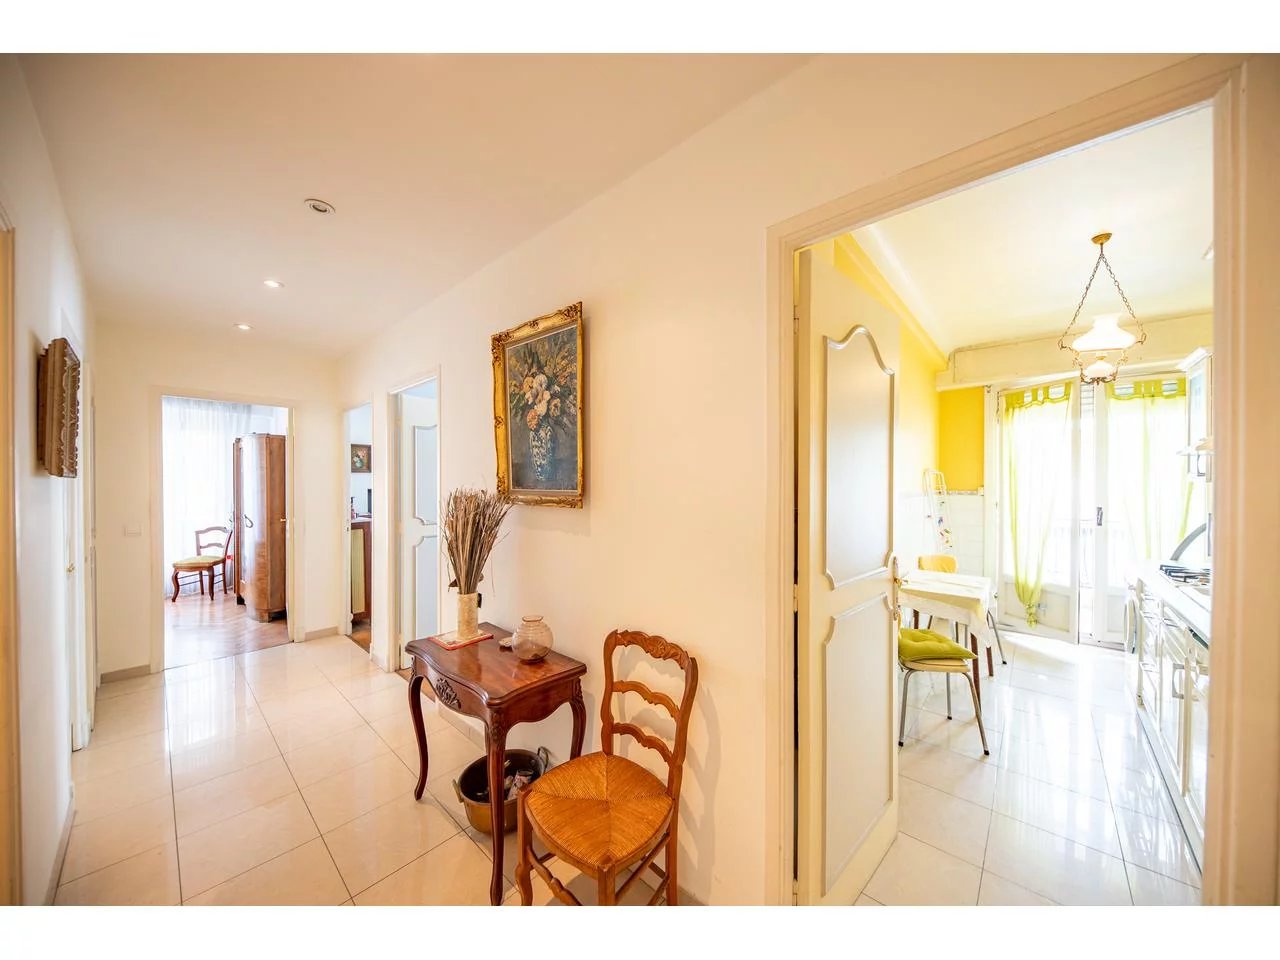 Appartement  3 Rooms 74.07m2  for sale   420 000 €